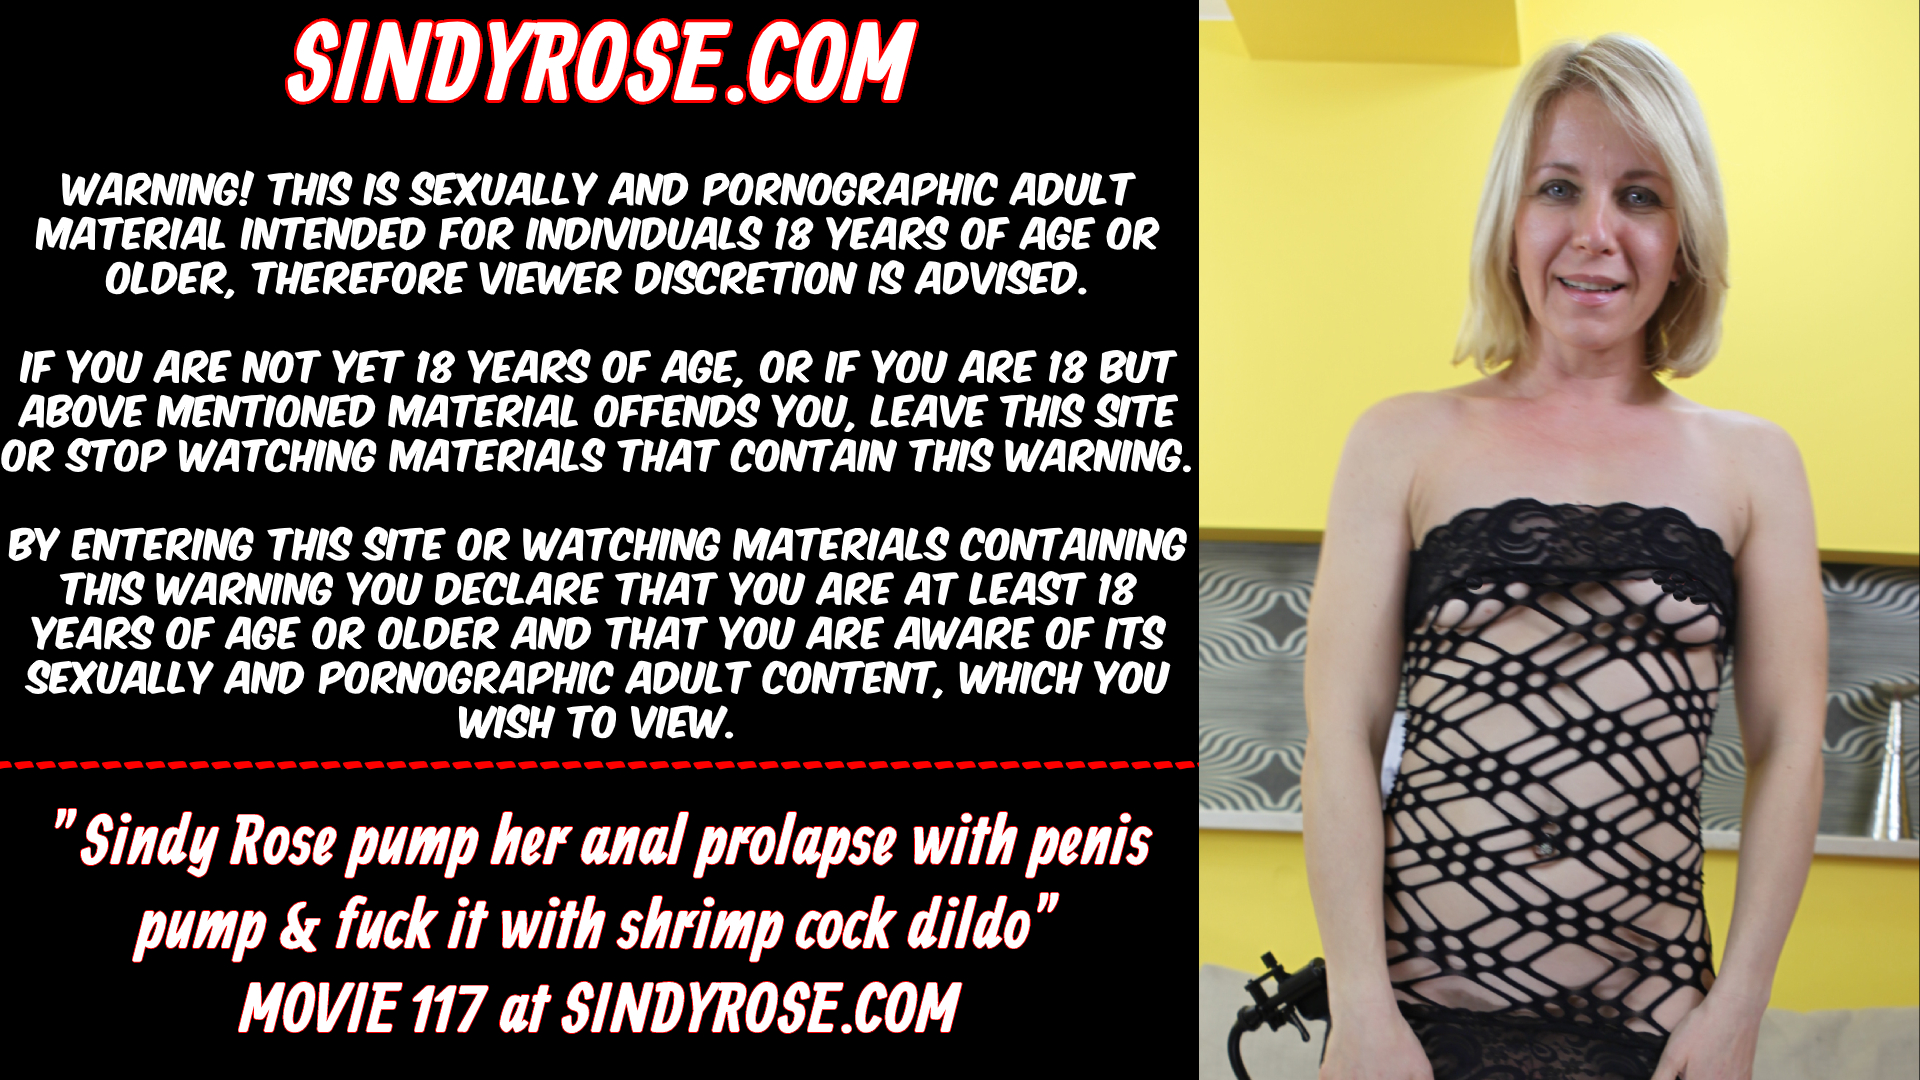 Sindy Rose pump her anal prolapse with penis pump